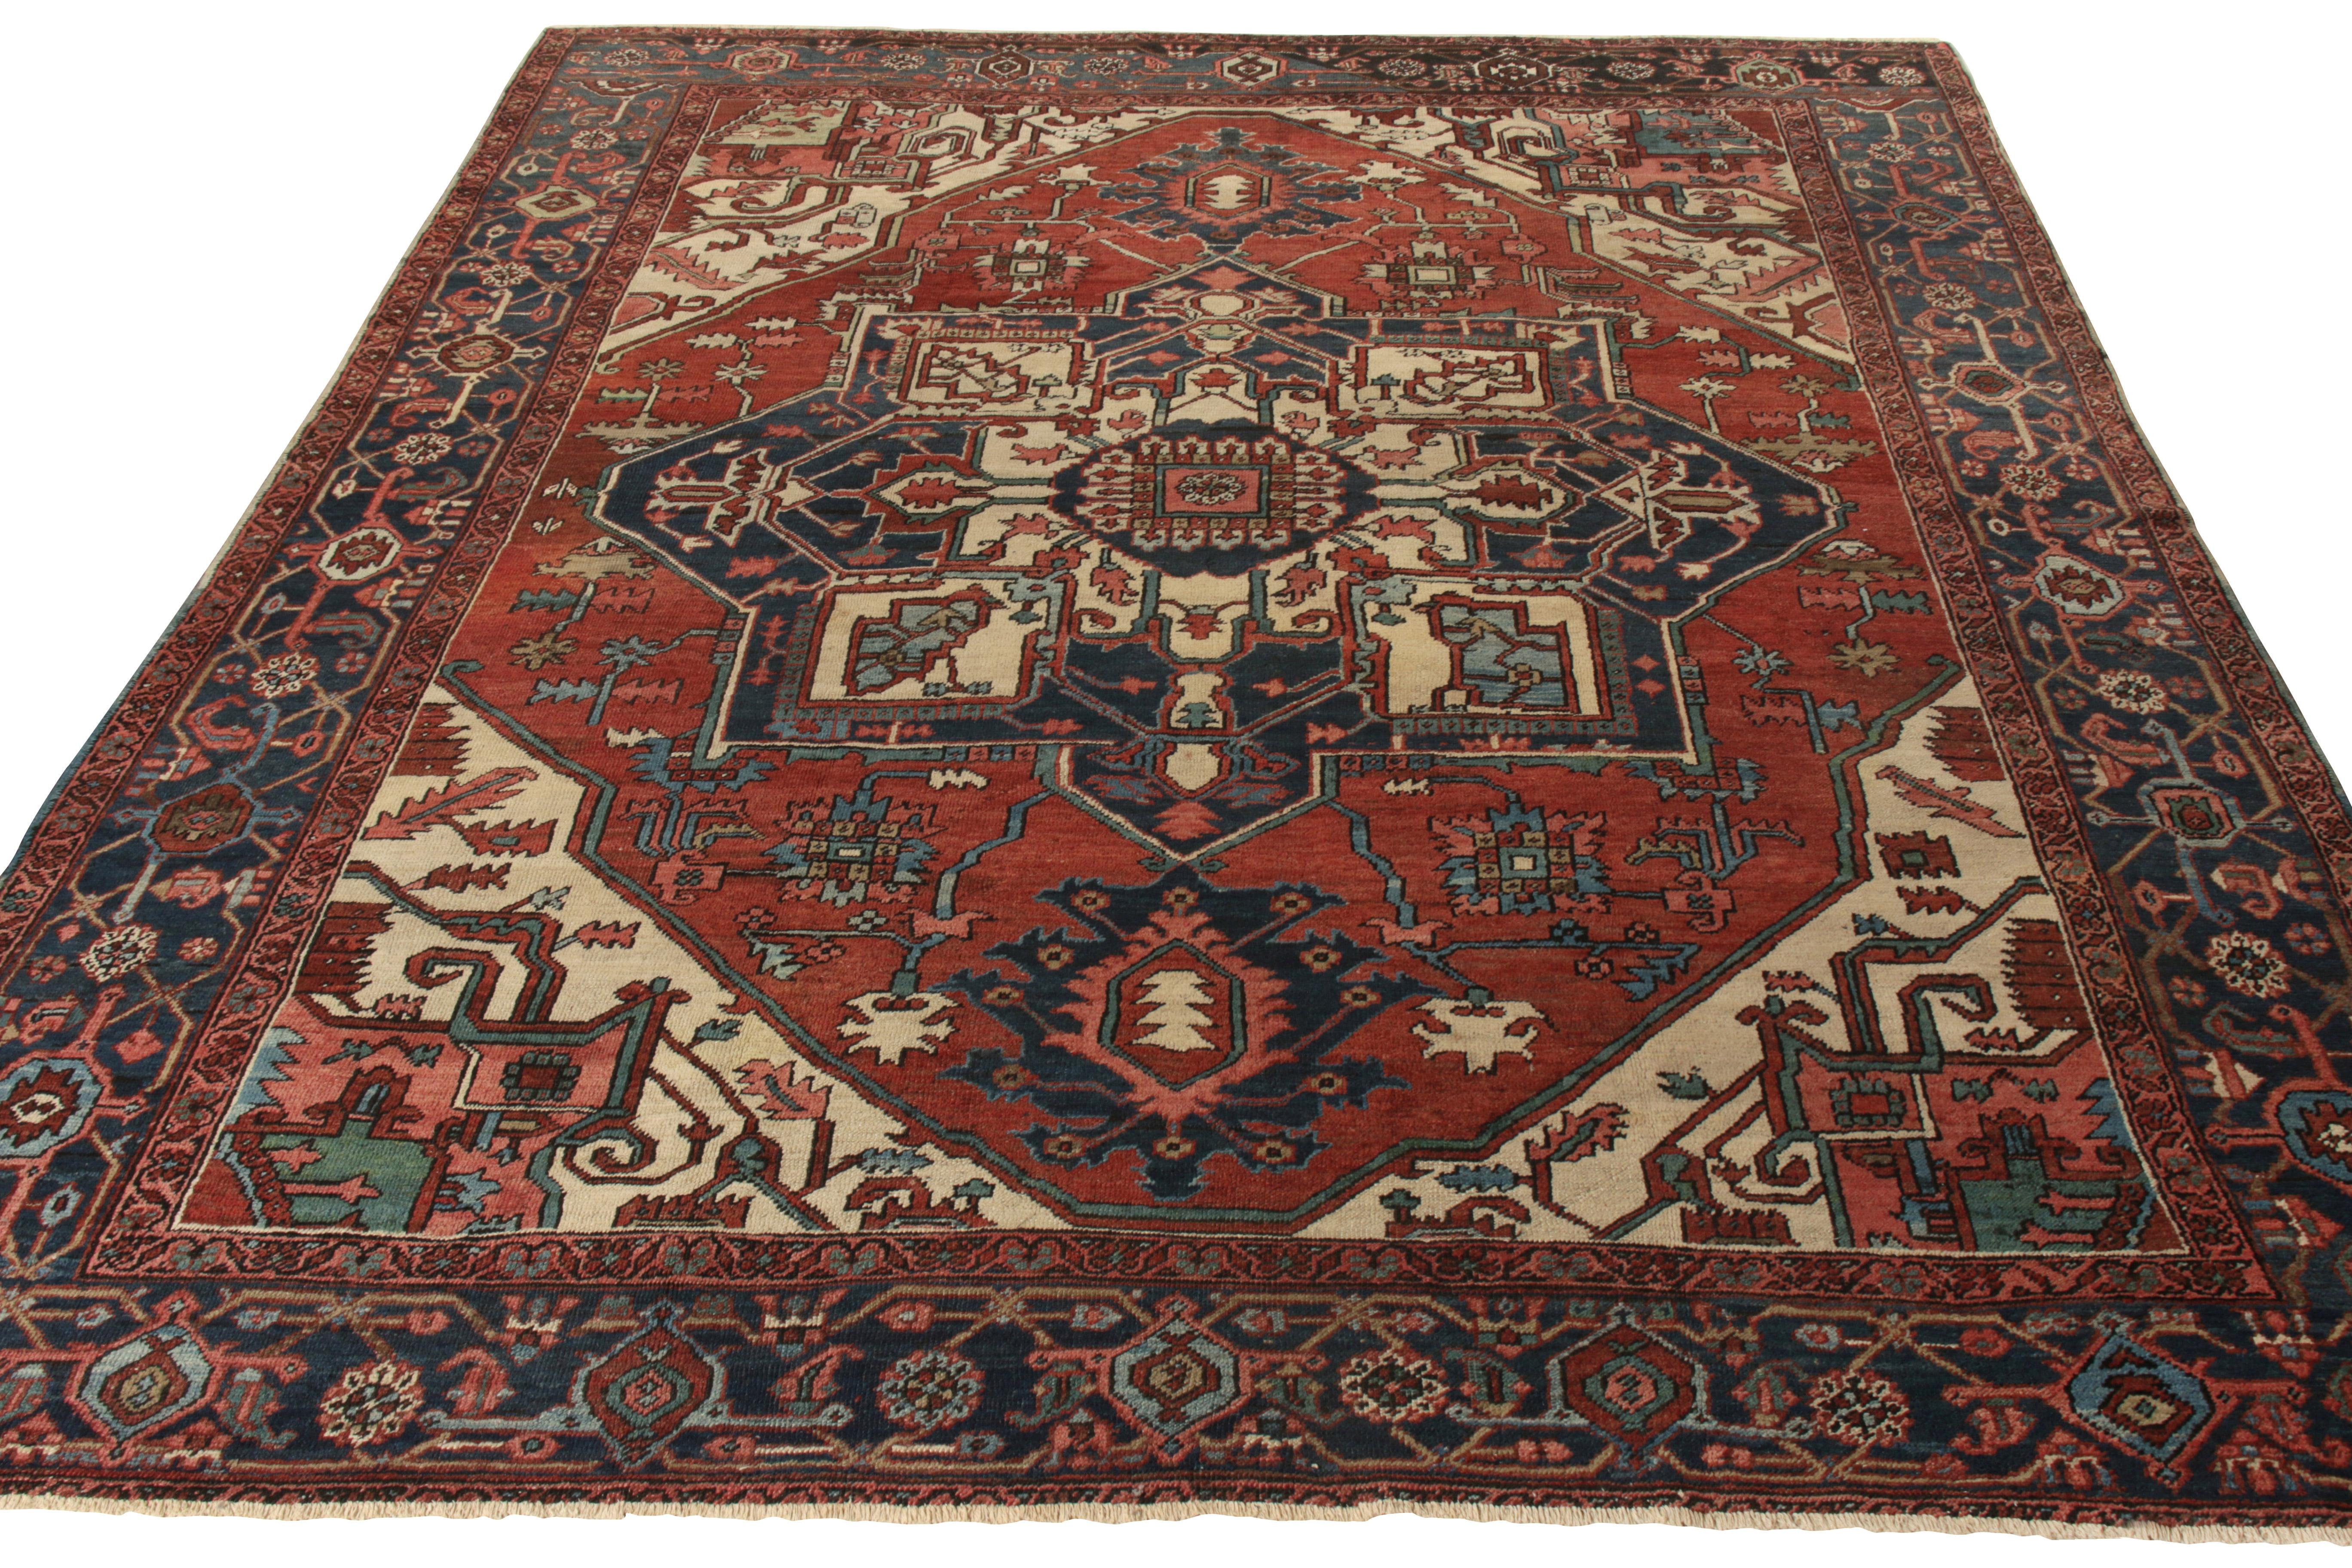 Hand knotted in wool, a 9x11 antique Heriz rug originating from Persia circa 1920-1930 making a grand entry to Rug & Kilim’s Antique & Vintage collection. Bearing fine Persian sensibilities of the early 19th century, the rug witnesses a